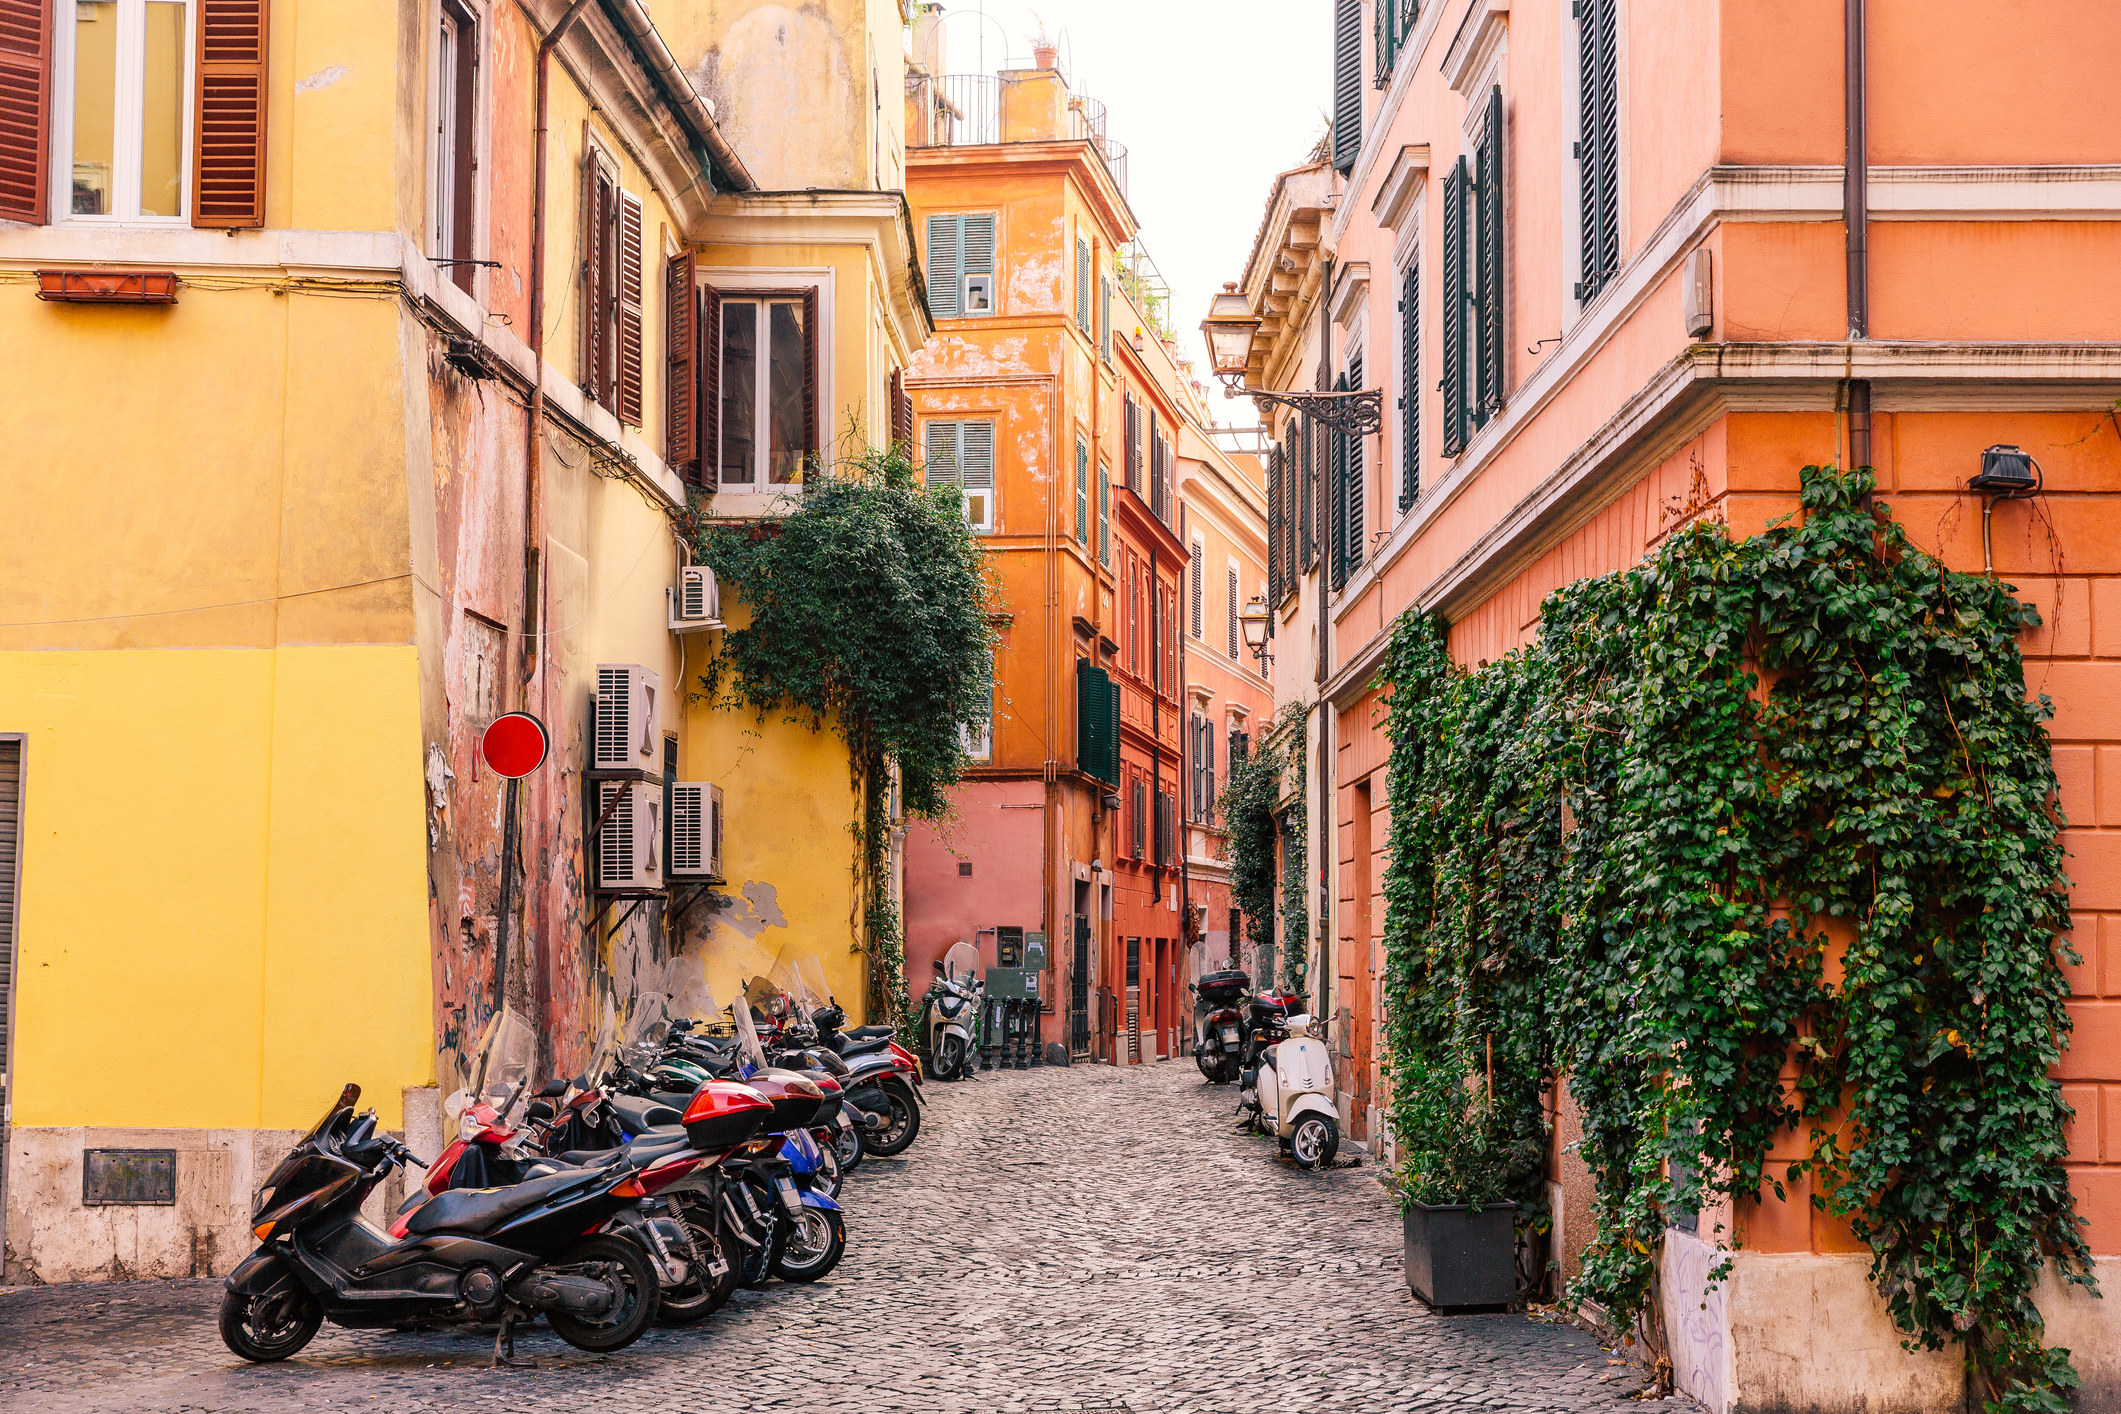 Cobblestone streets and leafy vines in Trastevere.